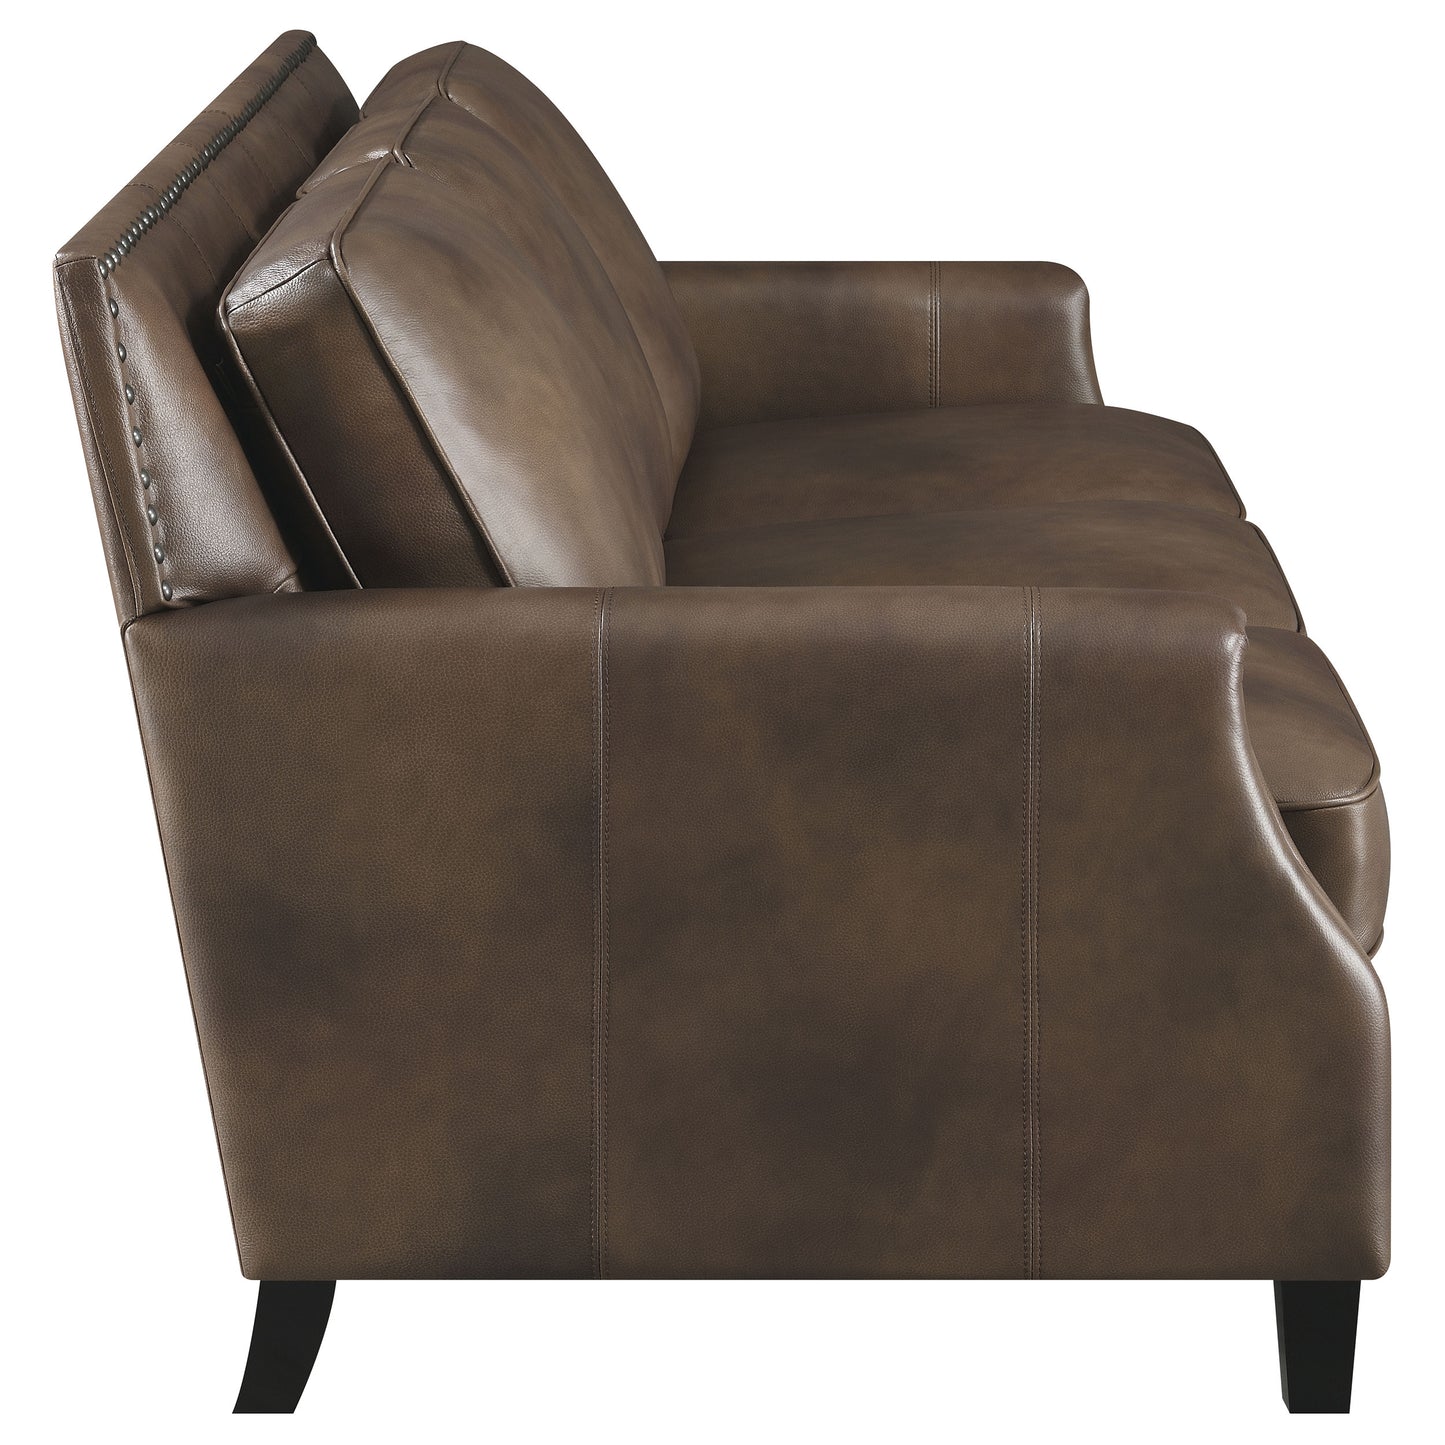 Leaton 2-piece Recessed Arms Living Room Set Brown Sugar